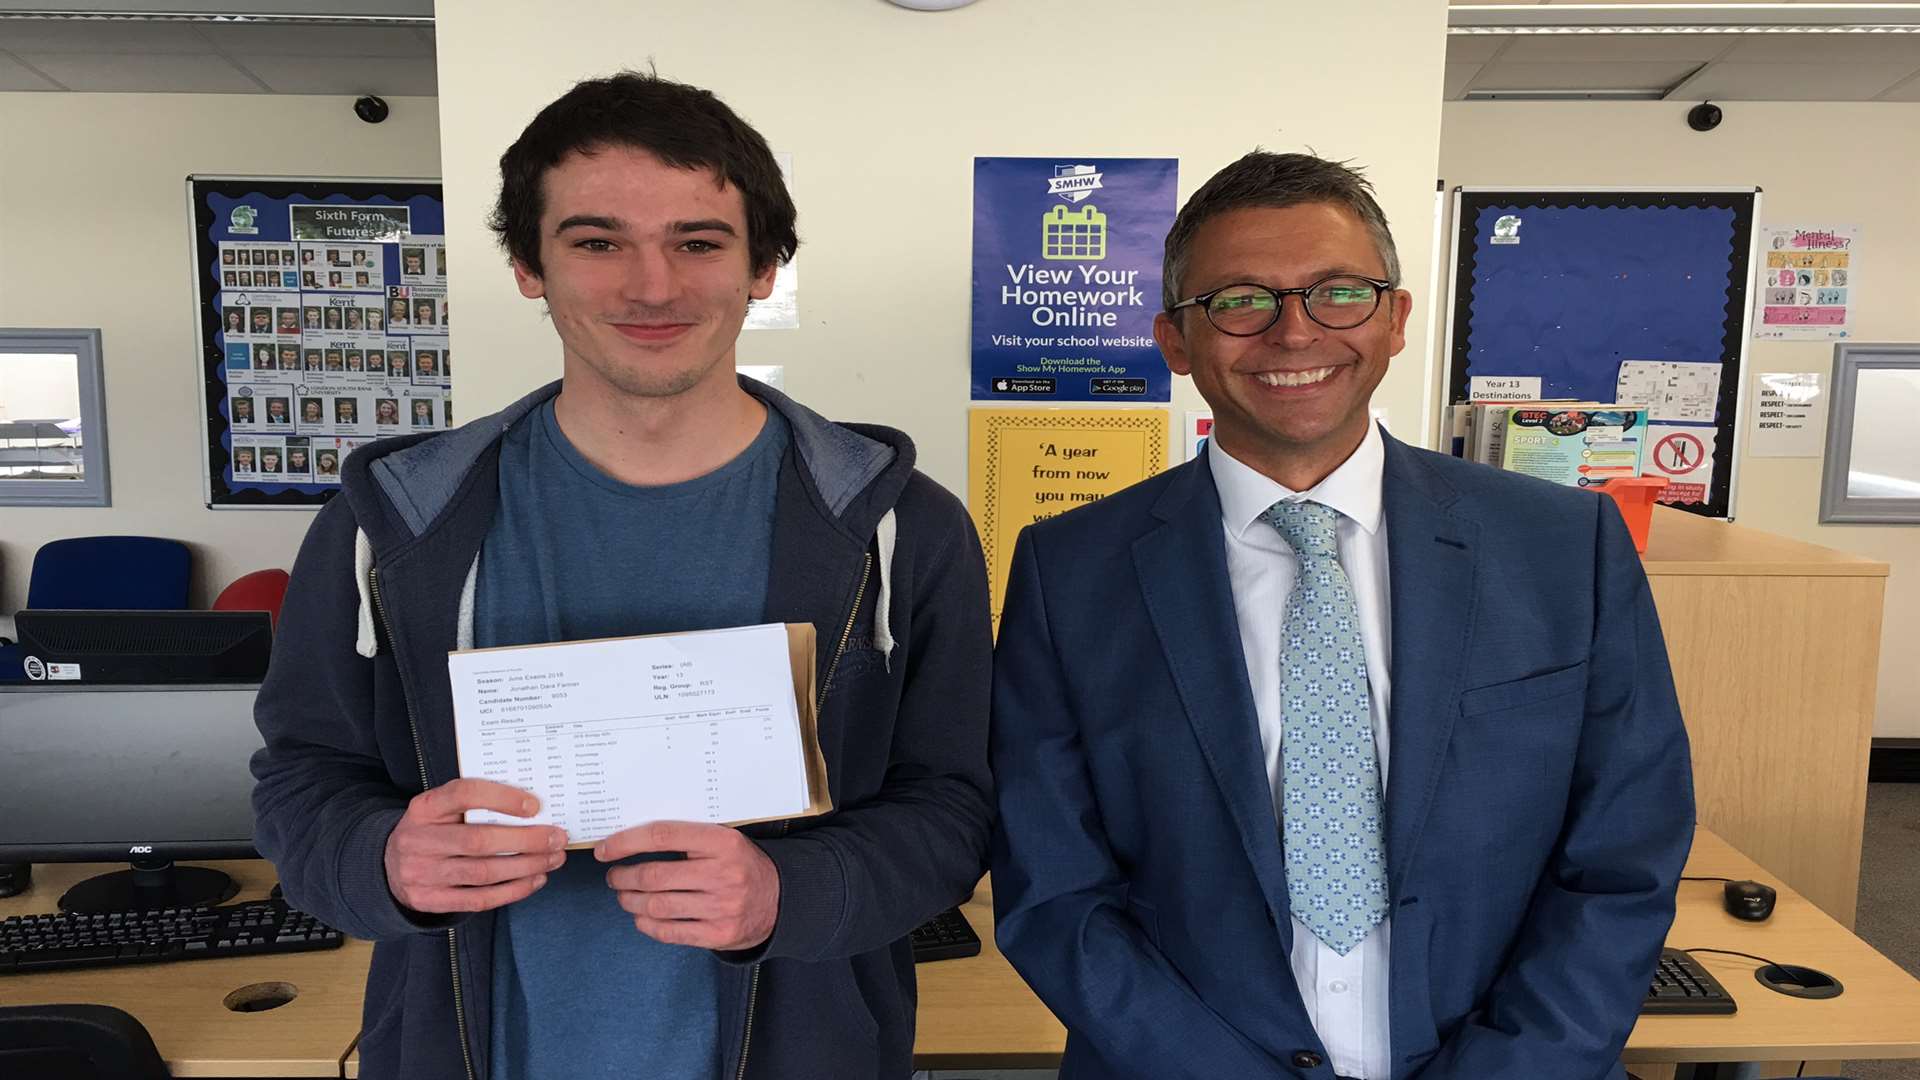 Jonathon Farmer from Wrotham School achieved AAC in his A-levels. He is pictured with Mr Carter, his head teacher